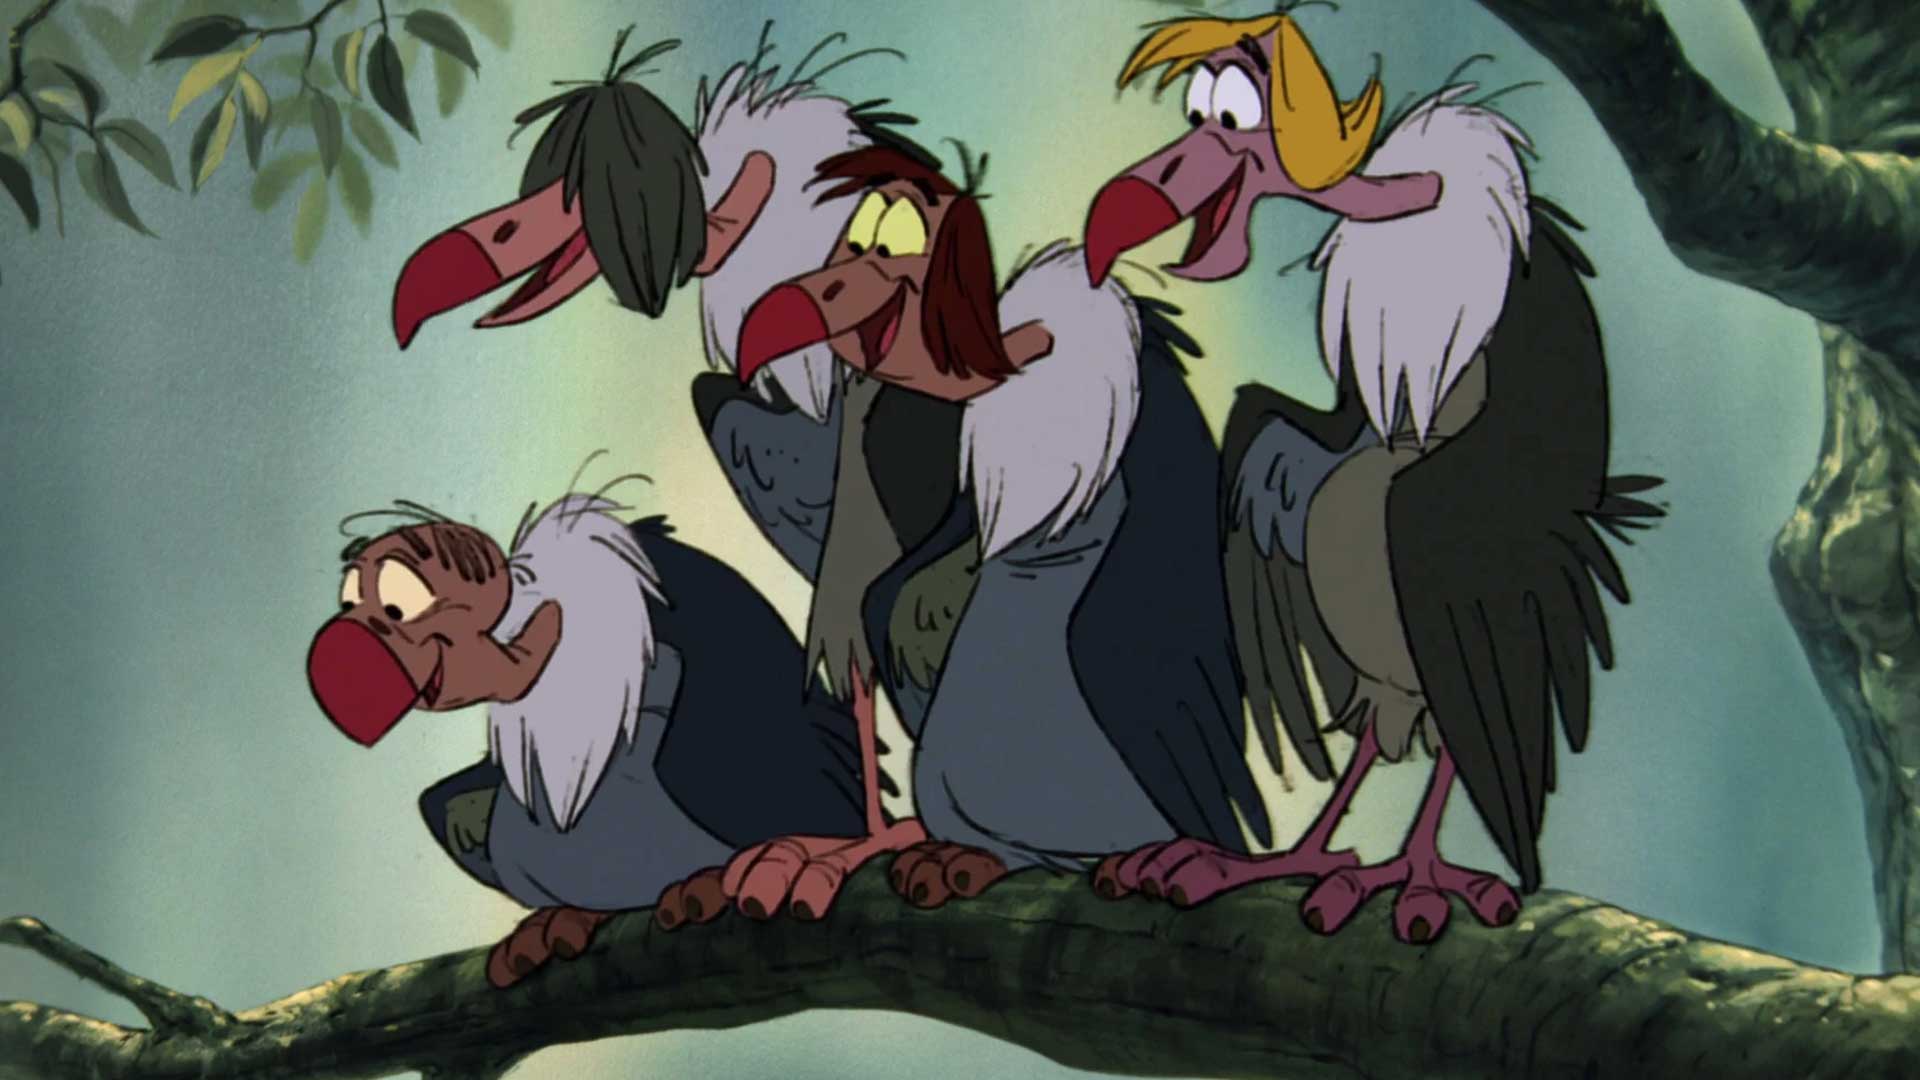 The vultures in Jungle Book